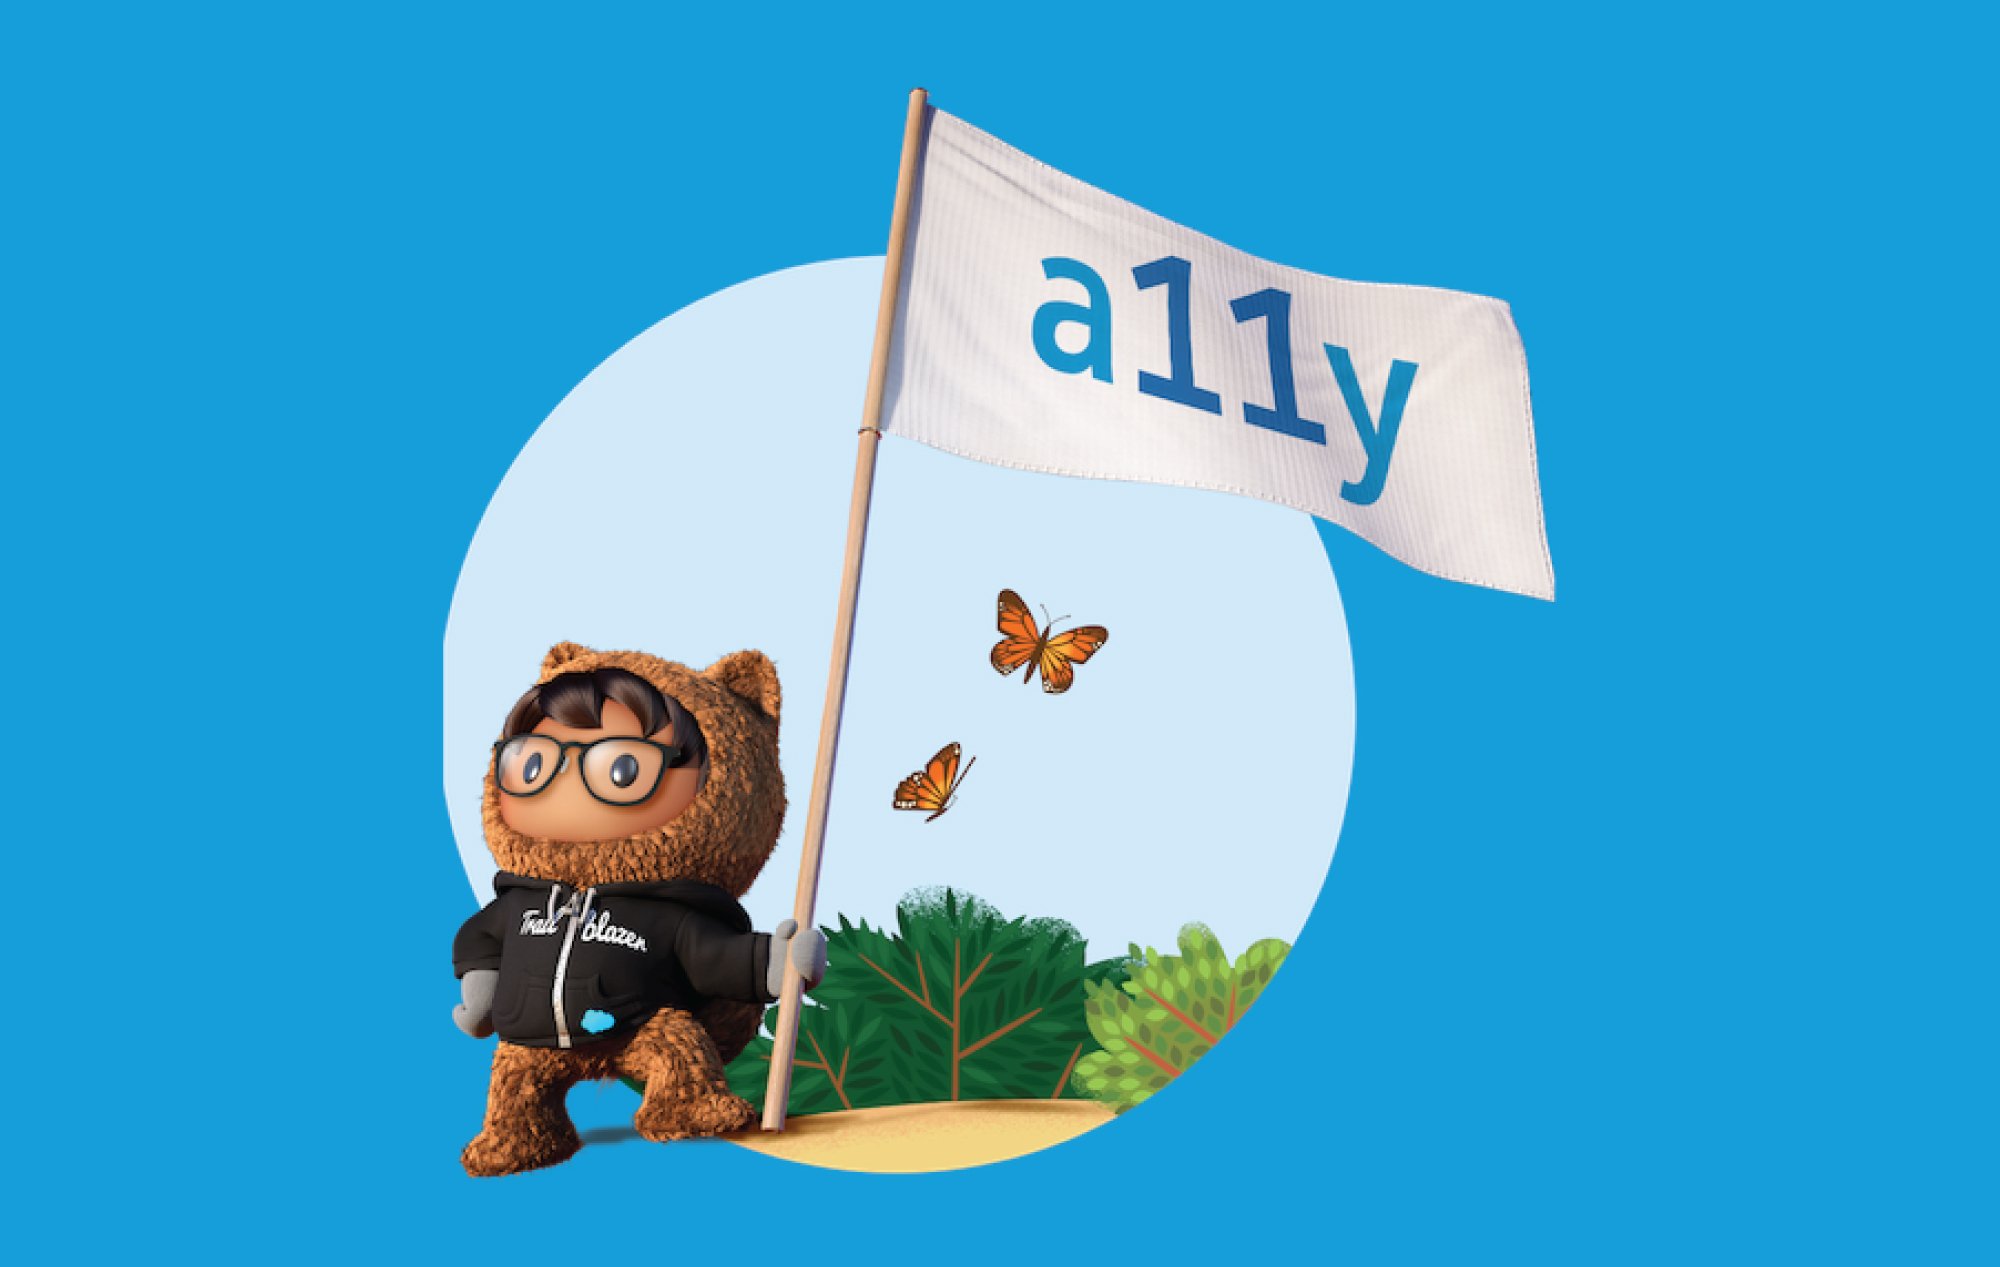 A Salesforce mascot standing and holding an a11y flag on a field of blue.